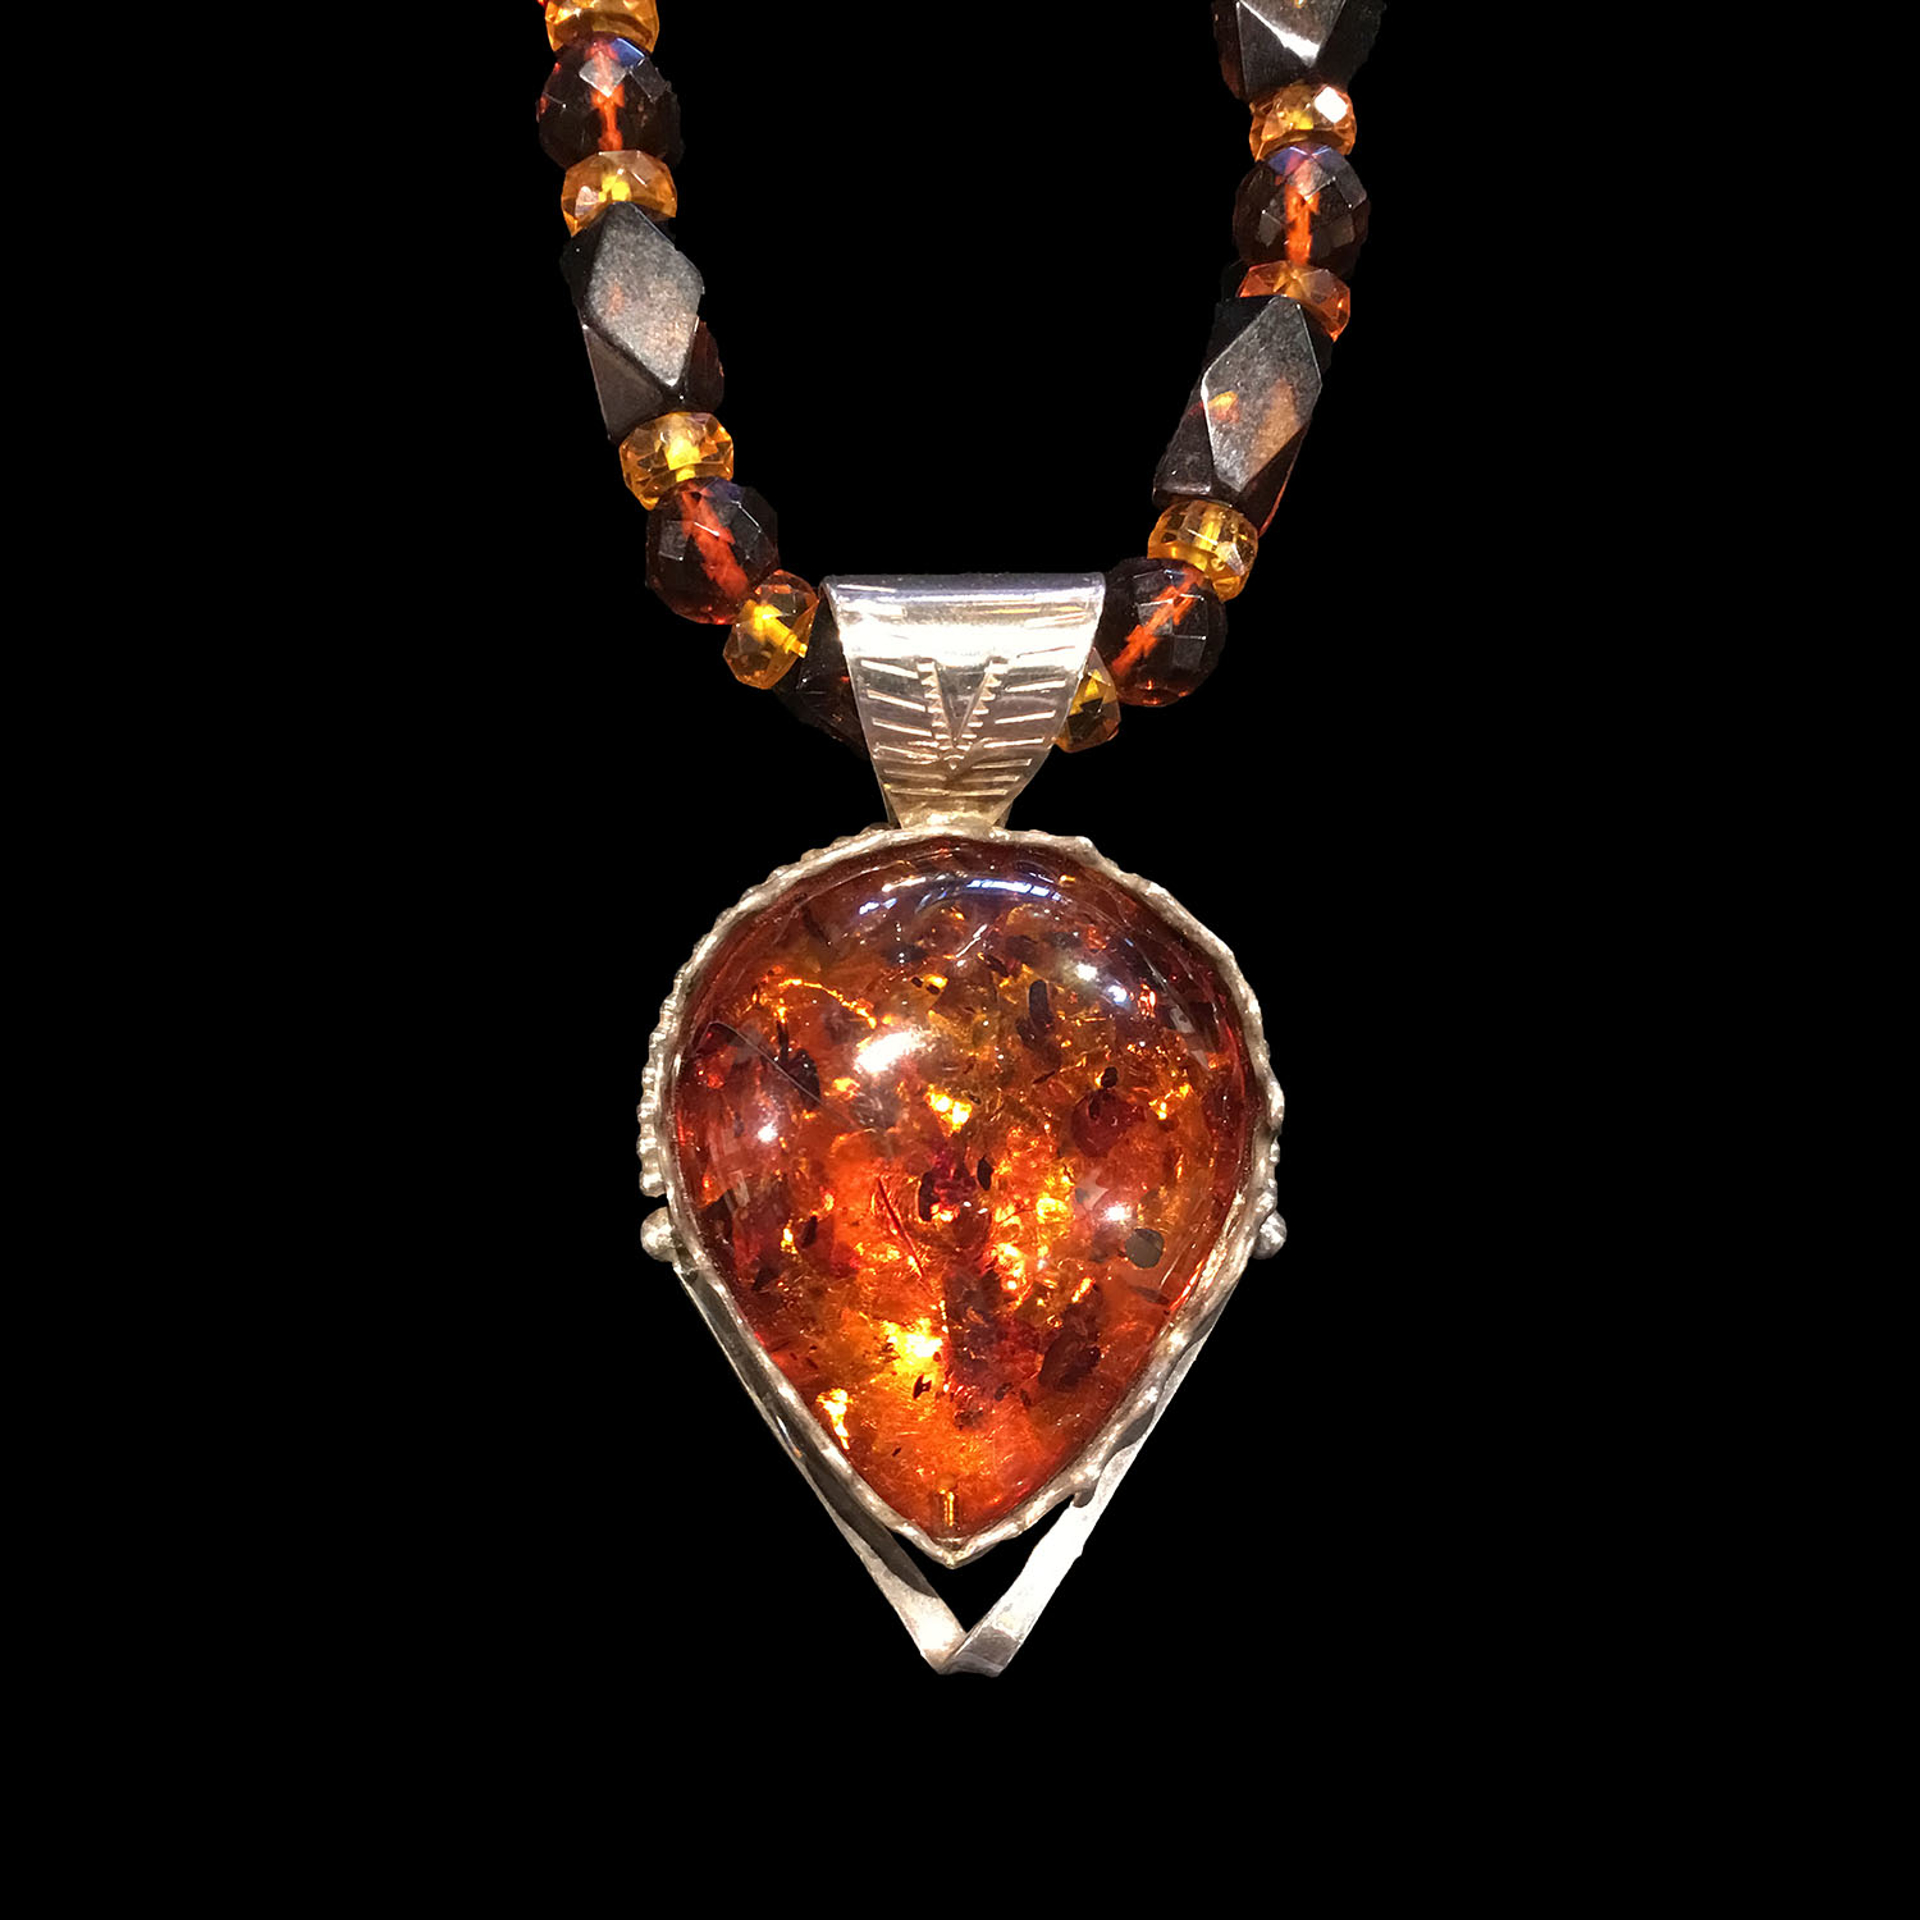 Baltic Amber on amber beads by Michael Redhawk